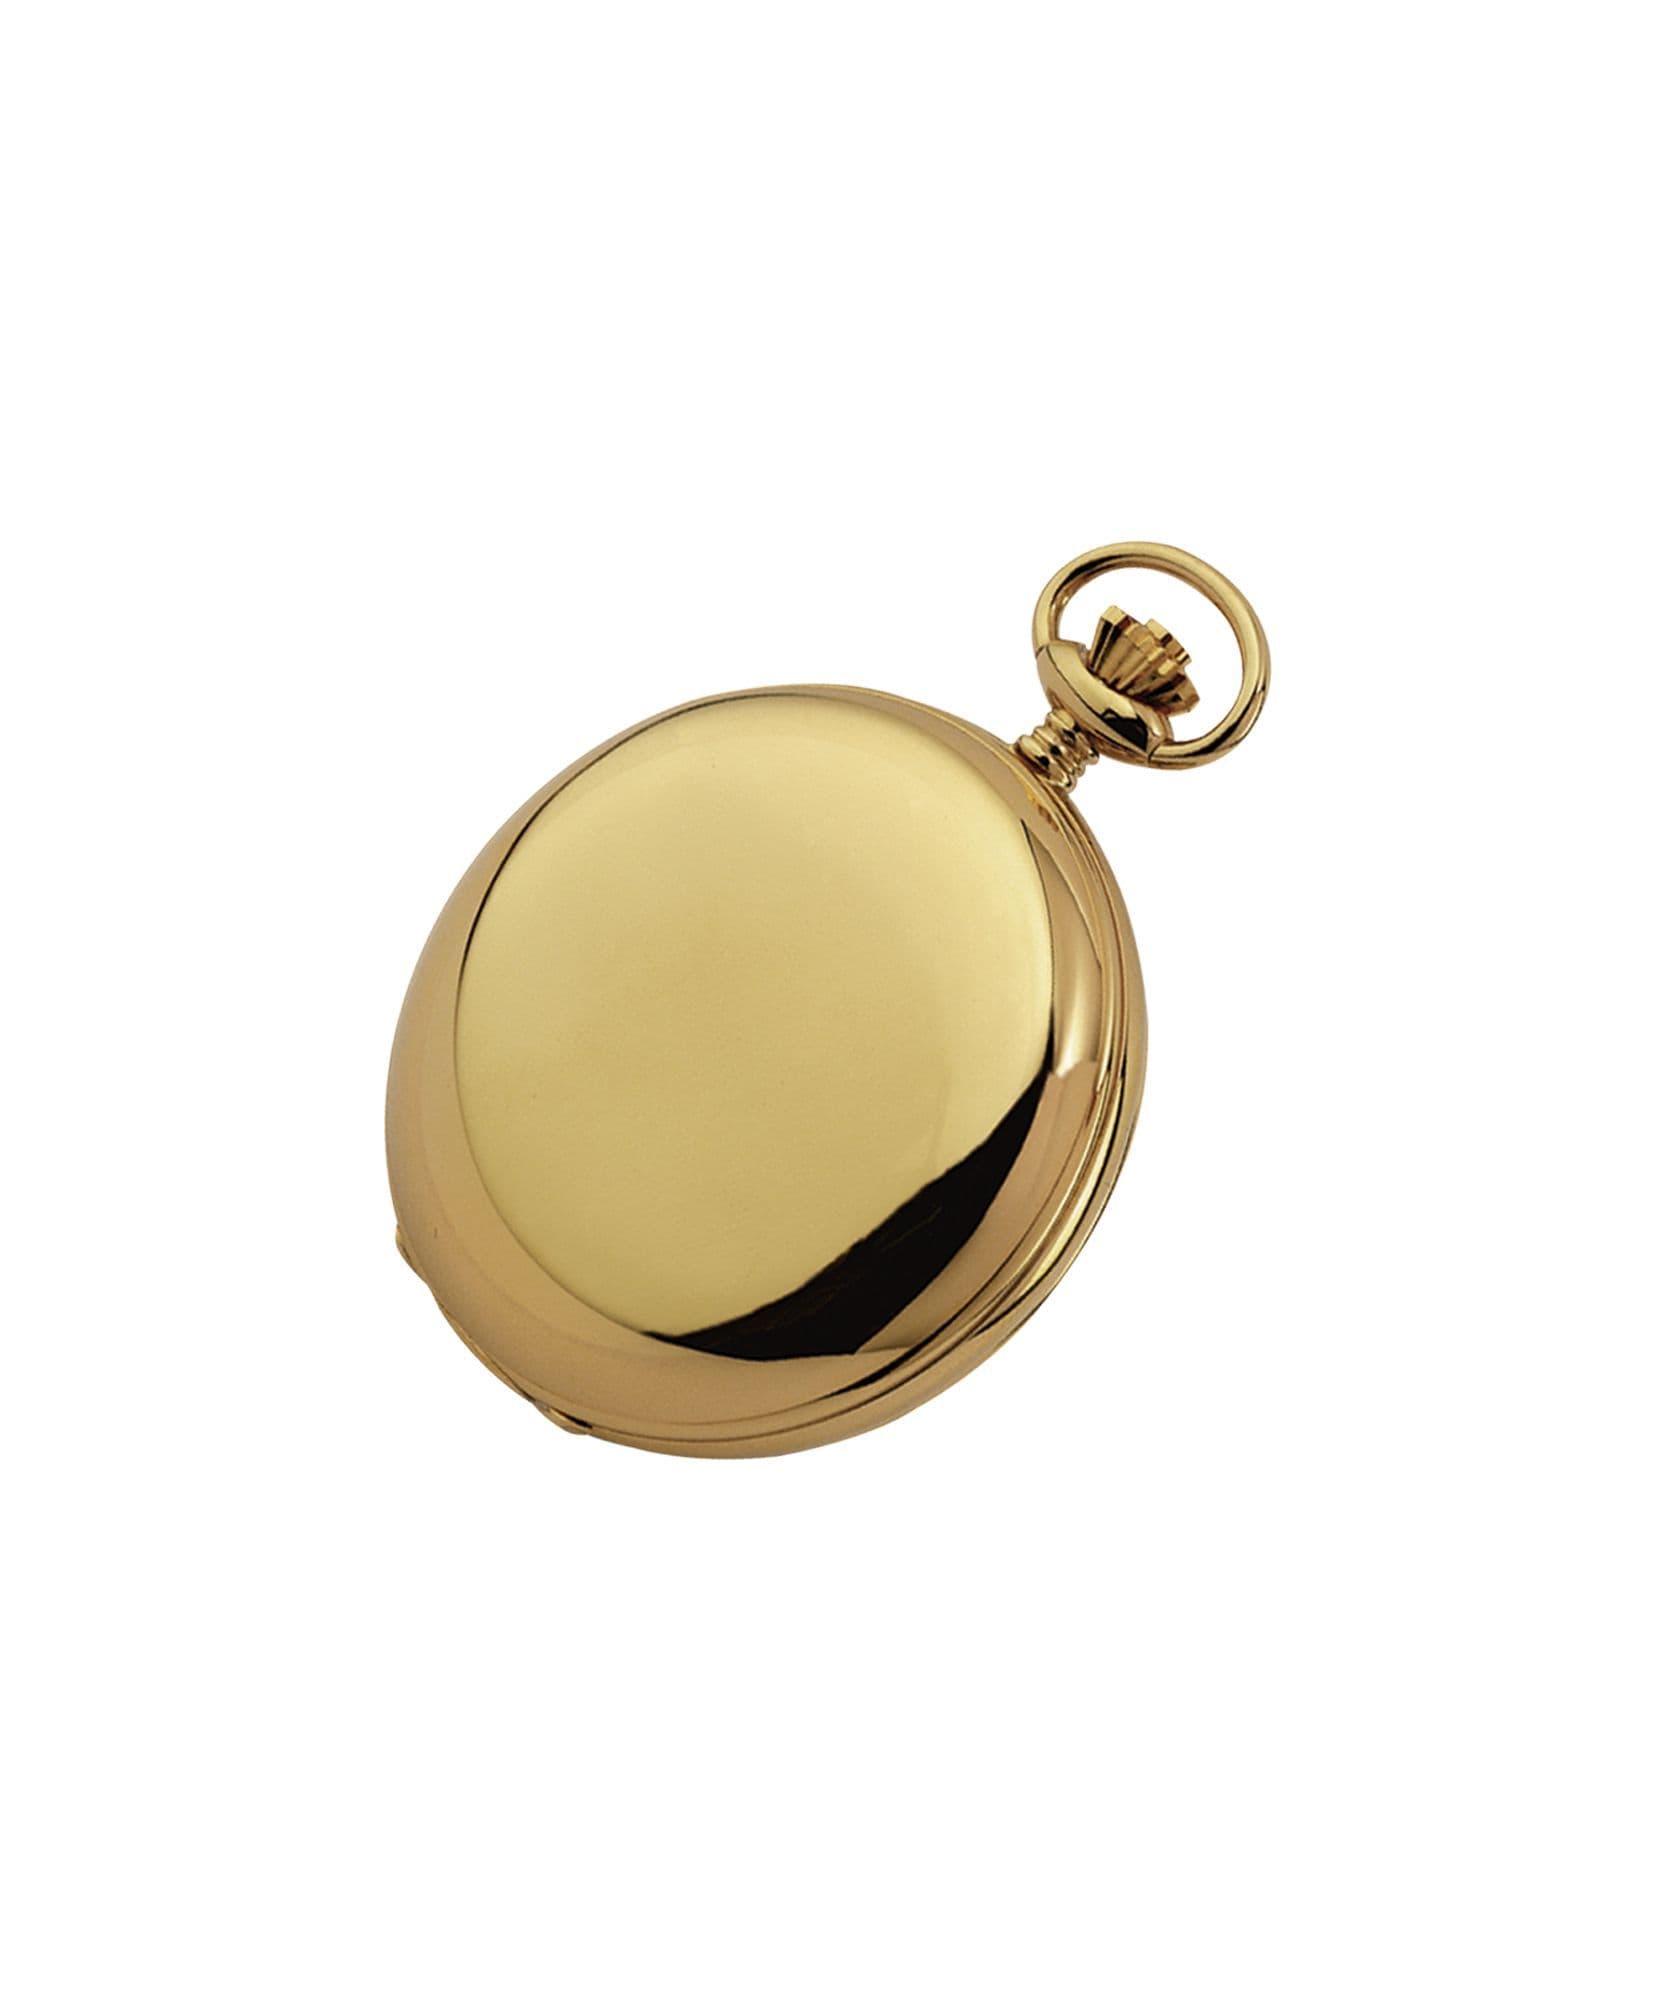 Mechanical Gold Plated Full Hunter Polished Pocket Watch With Chain Closed shut